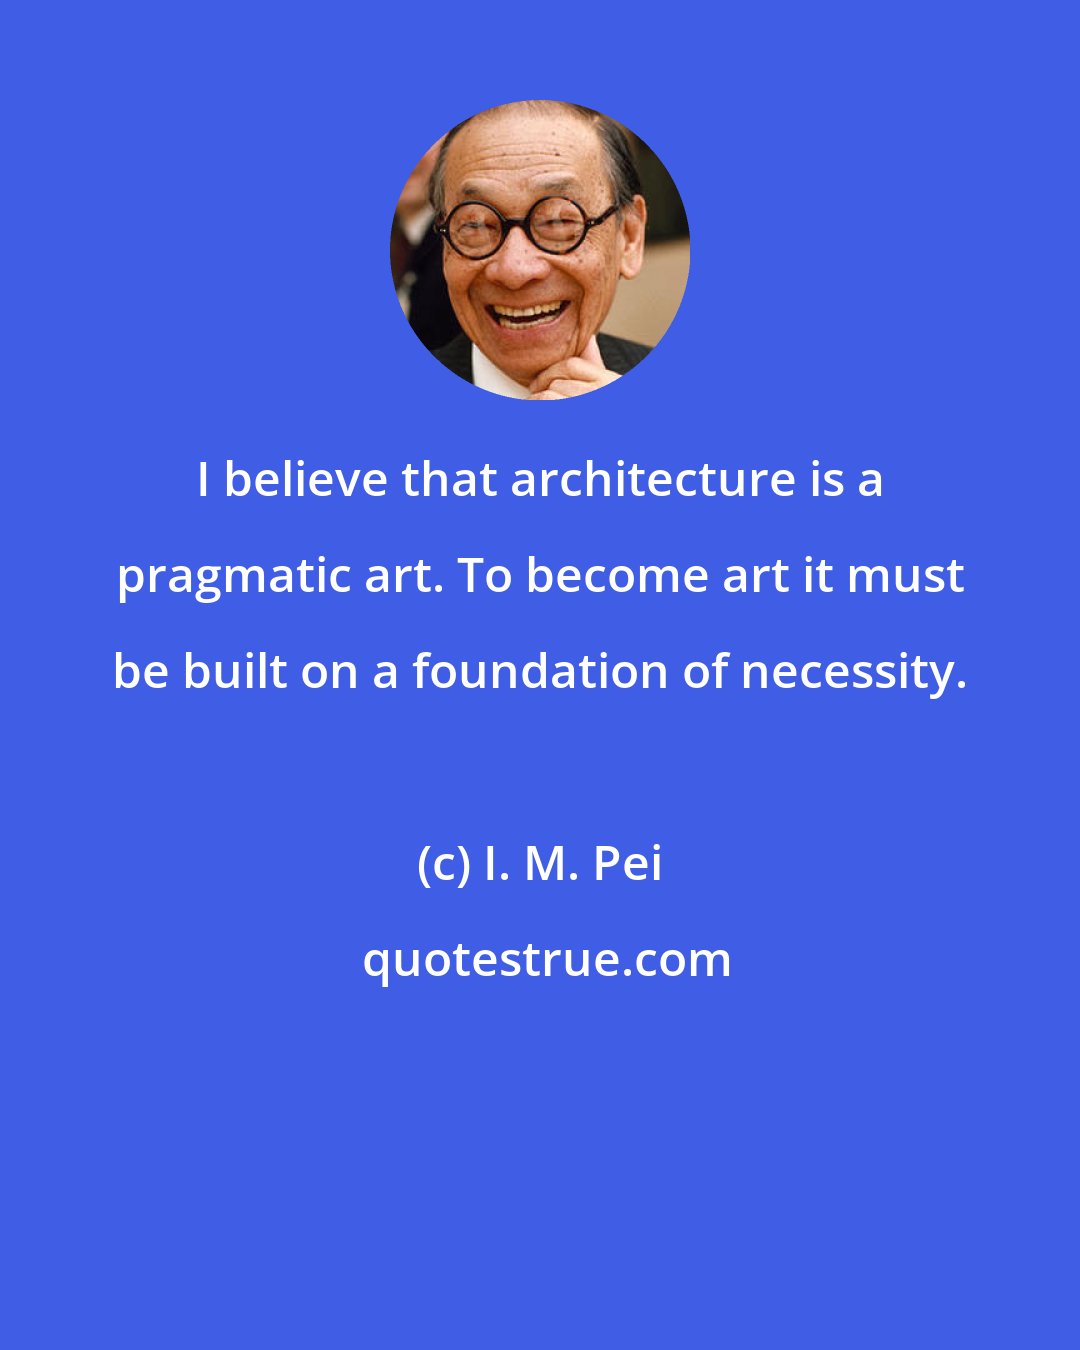 I. M. Pei: I believe that architecture is a pragmatic art. To become art it must be built on a foundation of necessity.